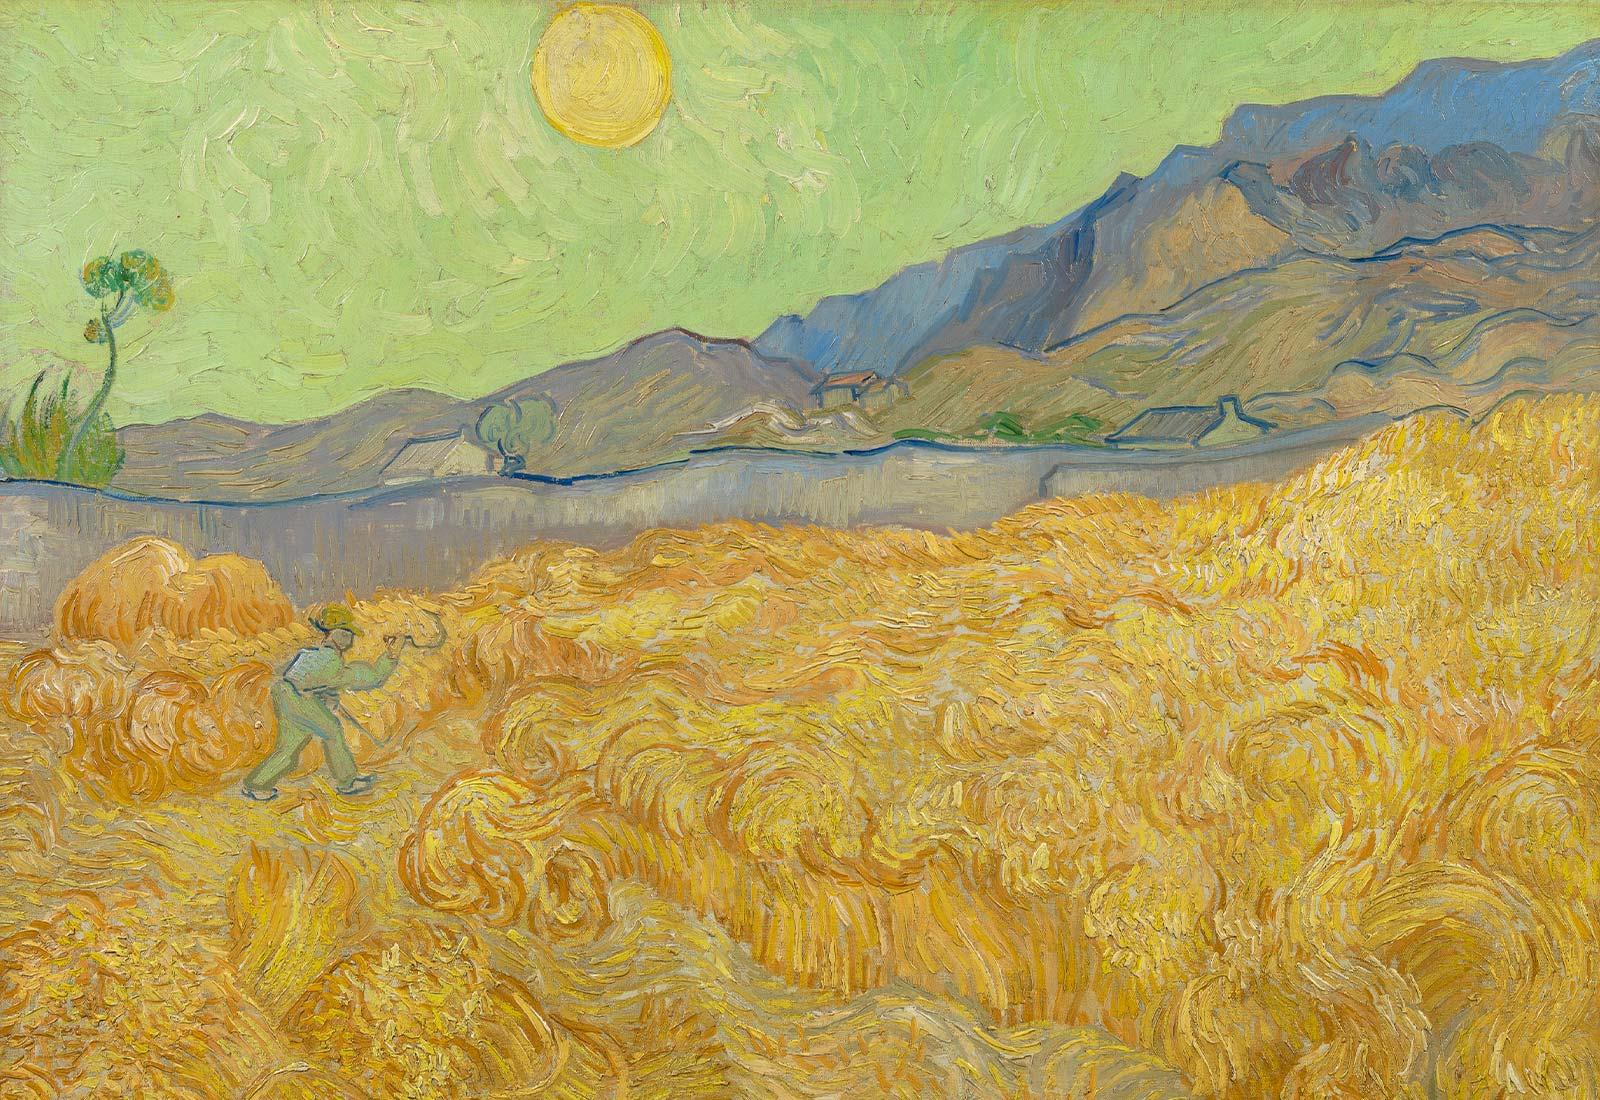 Vincent van Gogh, Wheatfield with a Reaper, 1889